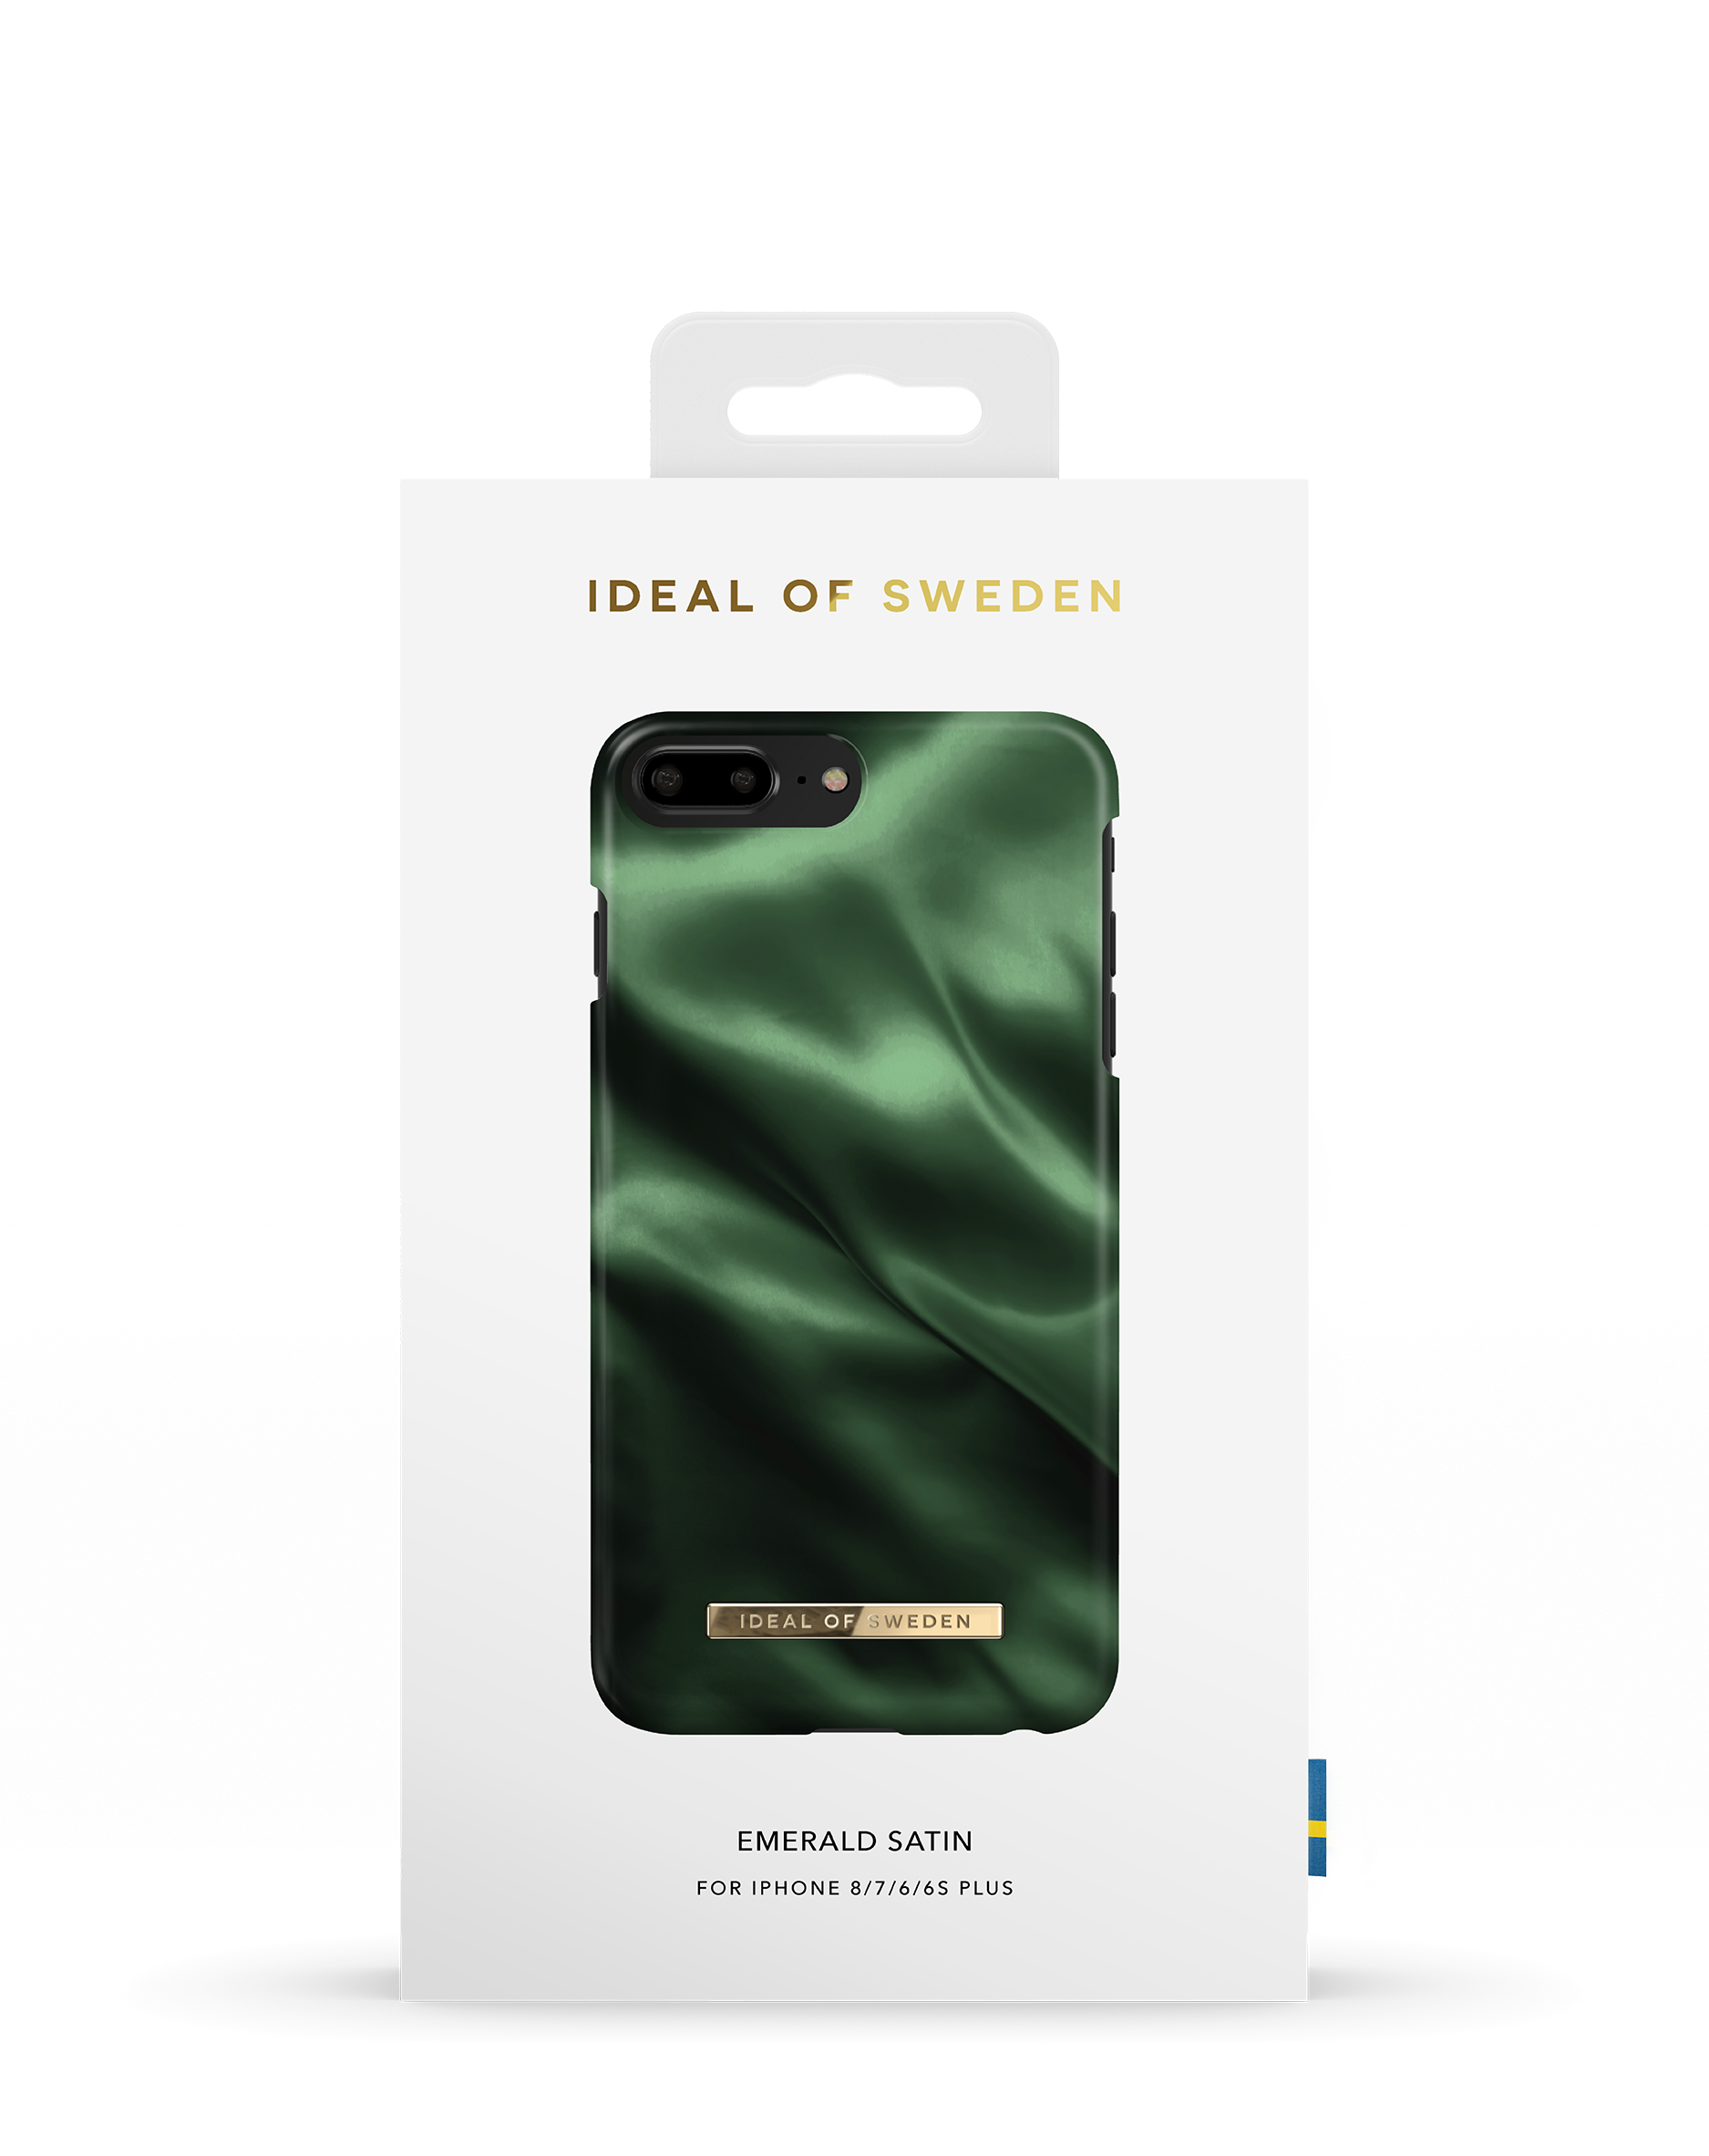 SWEDEN Backcover, 7 OF Plus, iPhone iPhone Apple, 8 IDFCAW19-I7P-154, Plus, Plus, Satin 6/6S Emerald iPhone IDEAL